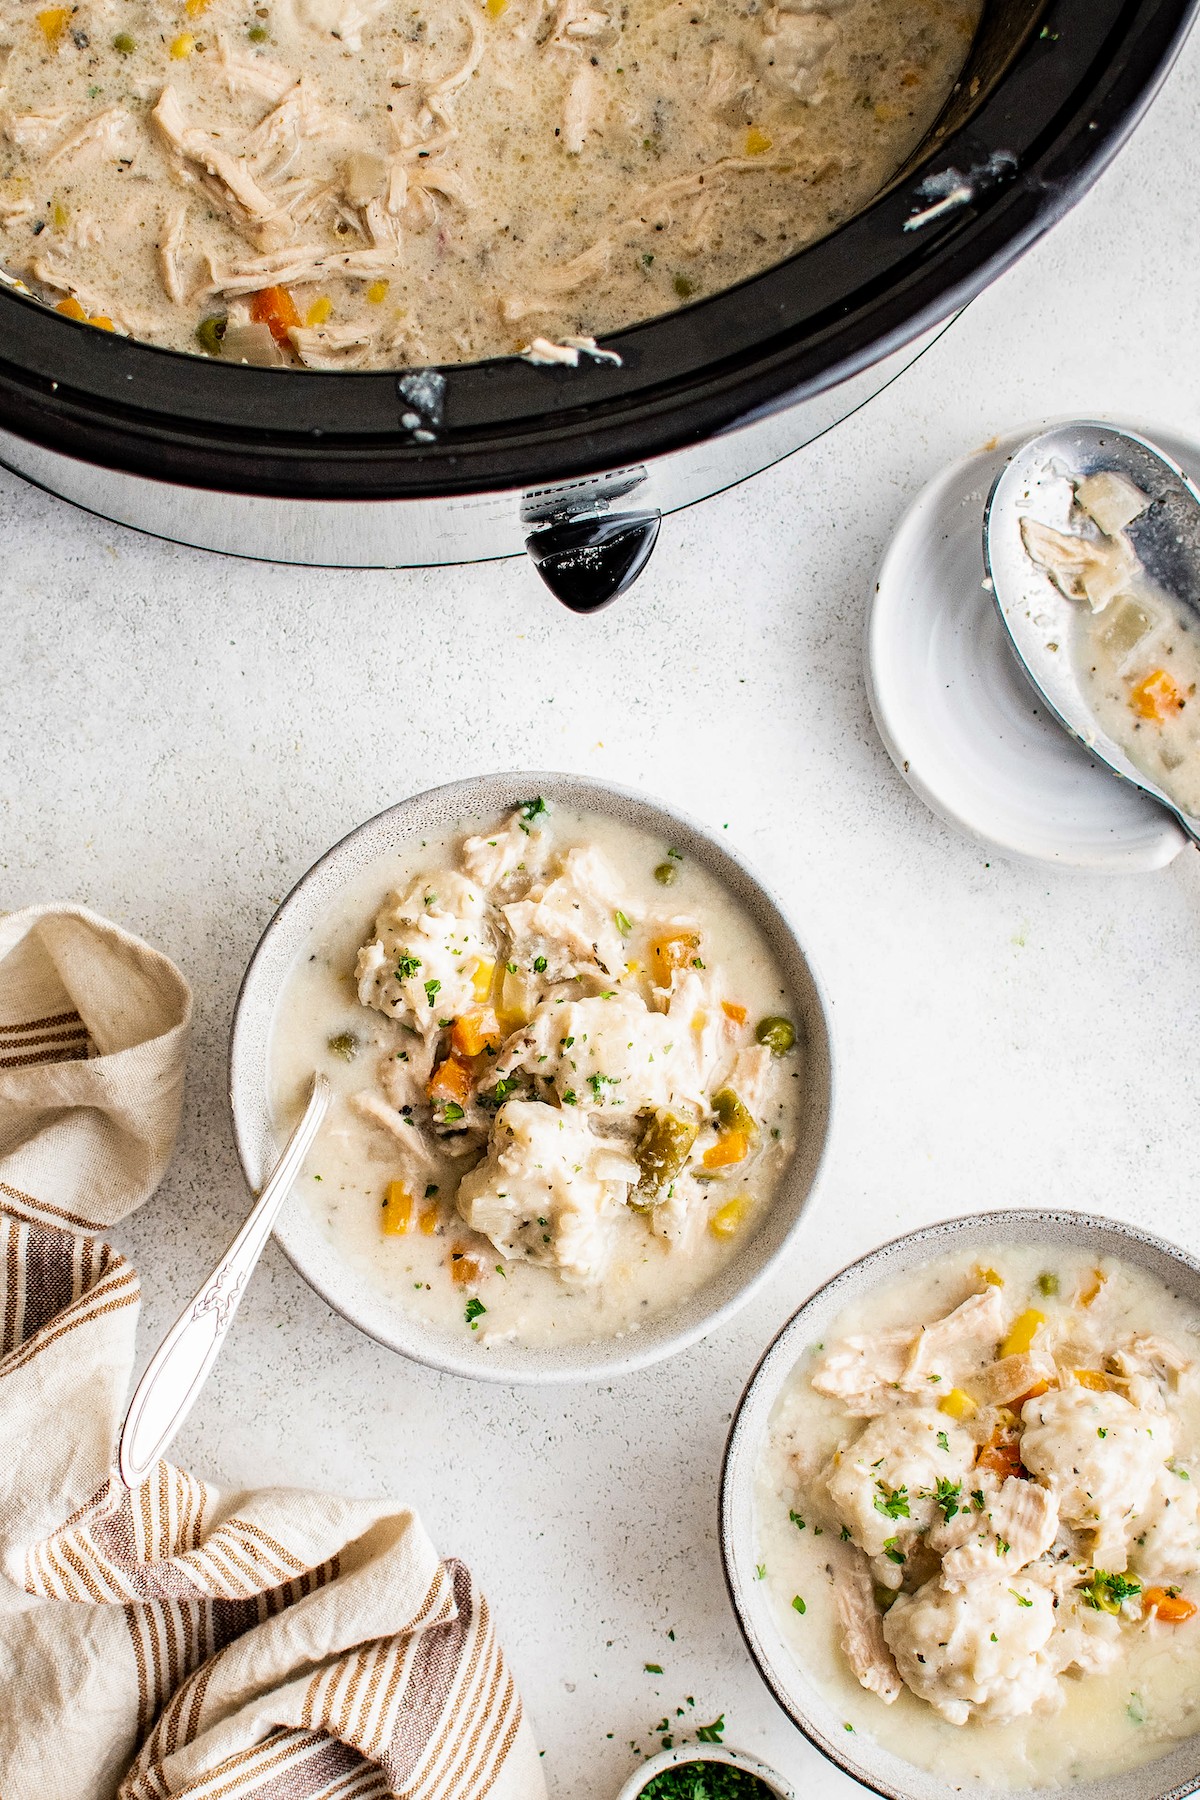 Bowls of creamy chicken and biscuit dumplings next to a slow cooker.